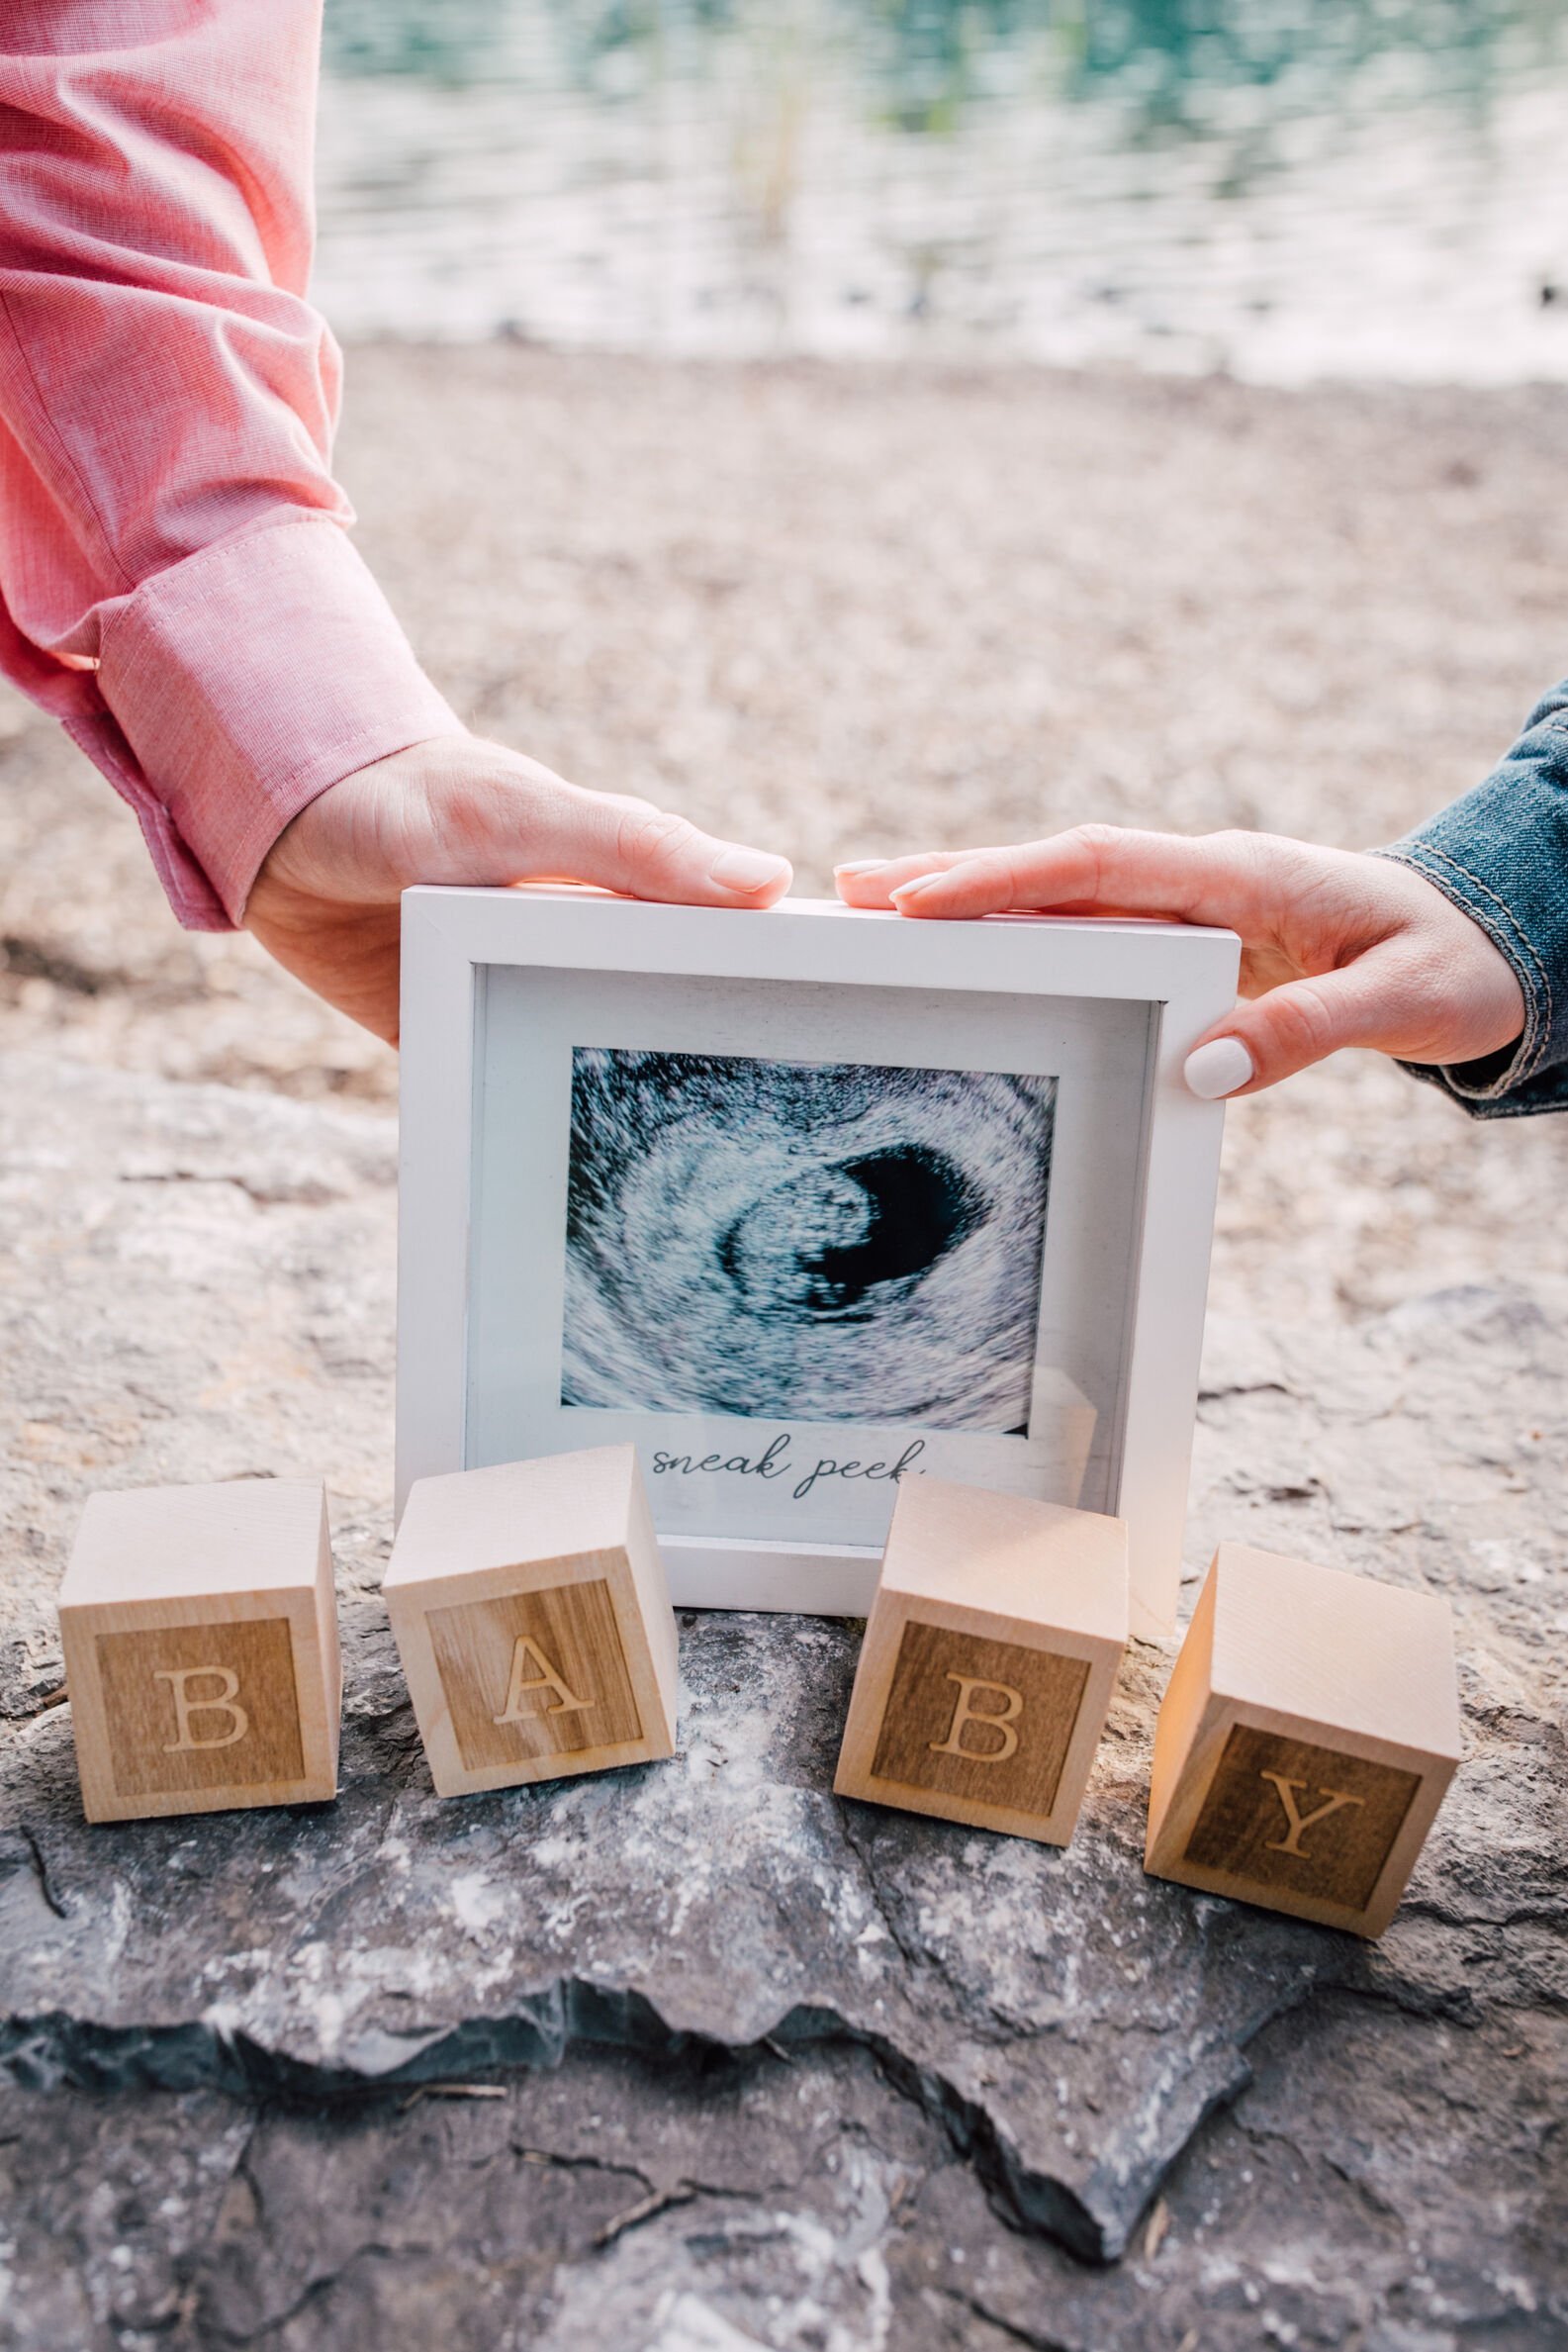  Parents to be hold ultrasound photo at pregnancy announcement photo shoot&nbsp; 